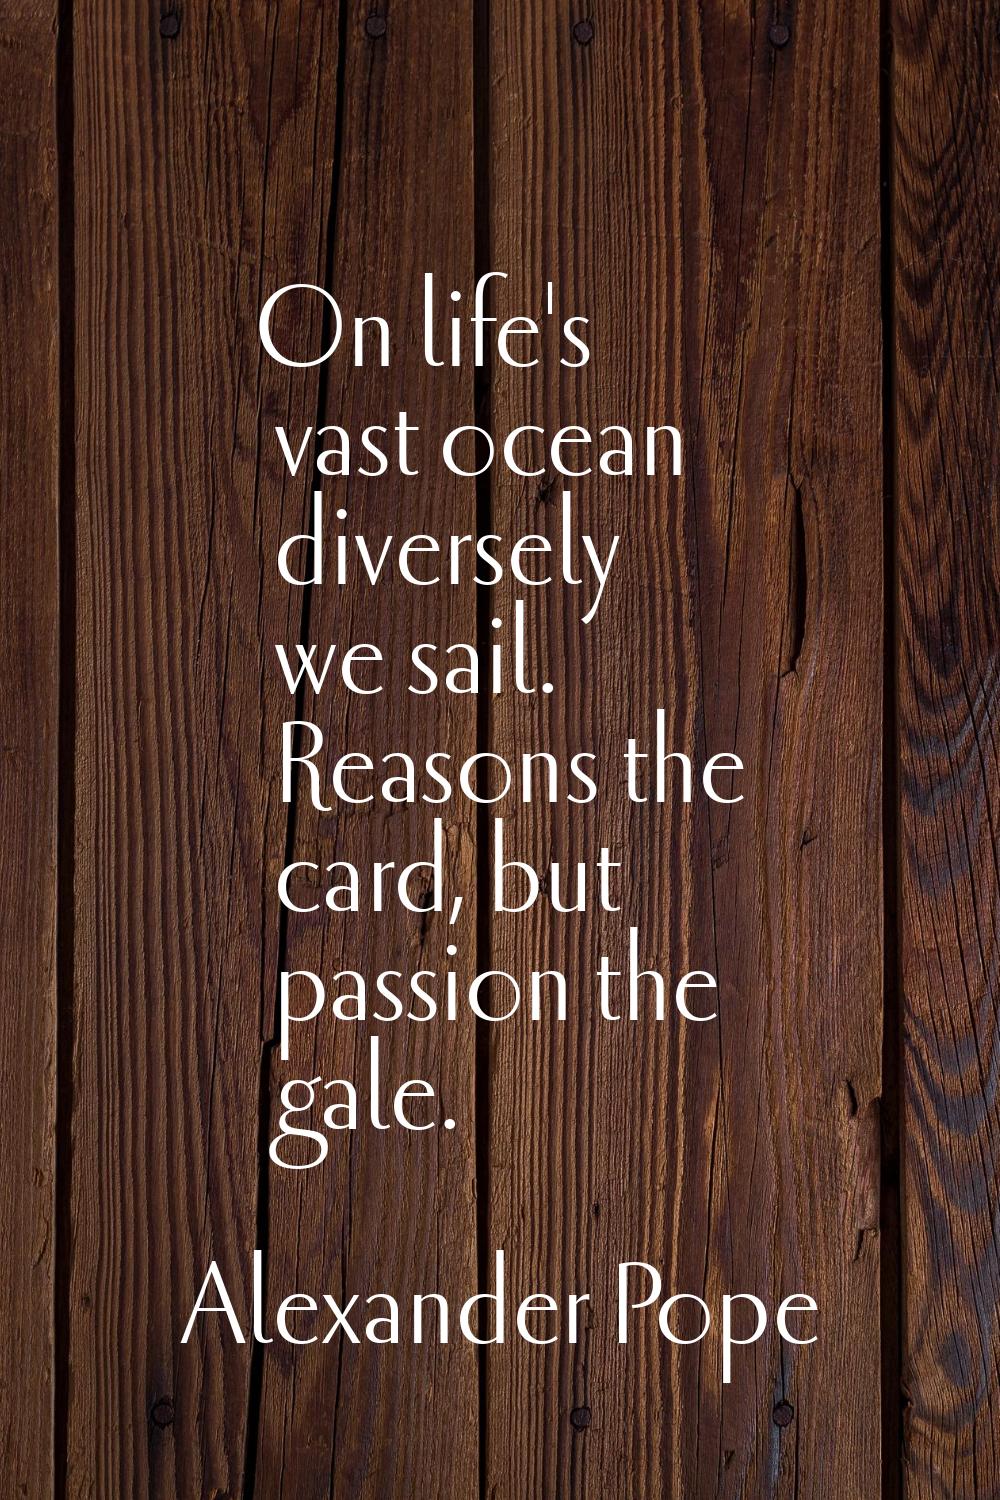 On life's vast ocean diversely we sail. Reasons the card, but passion the gale.